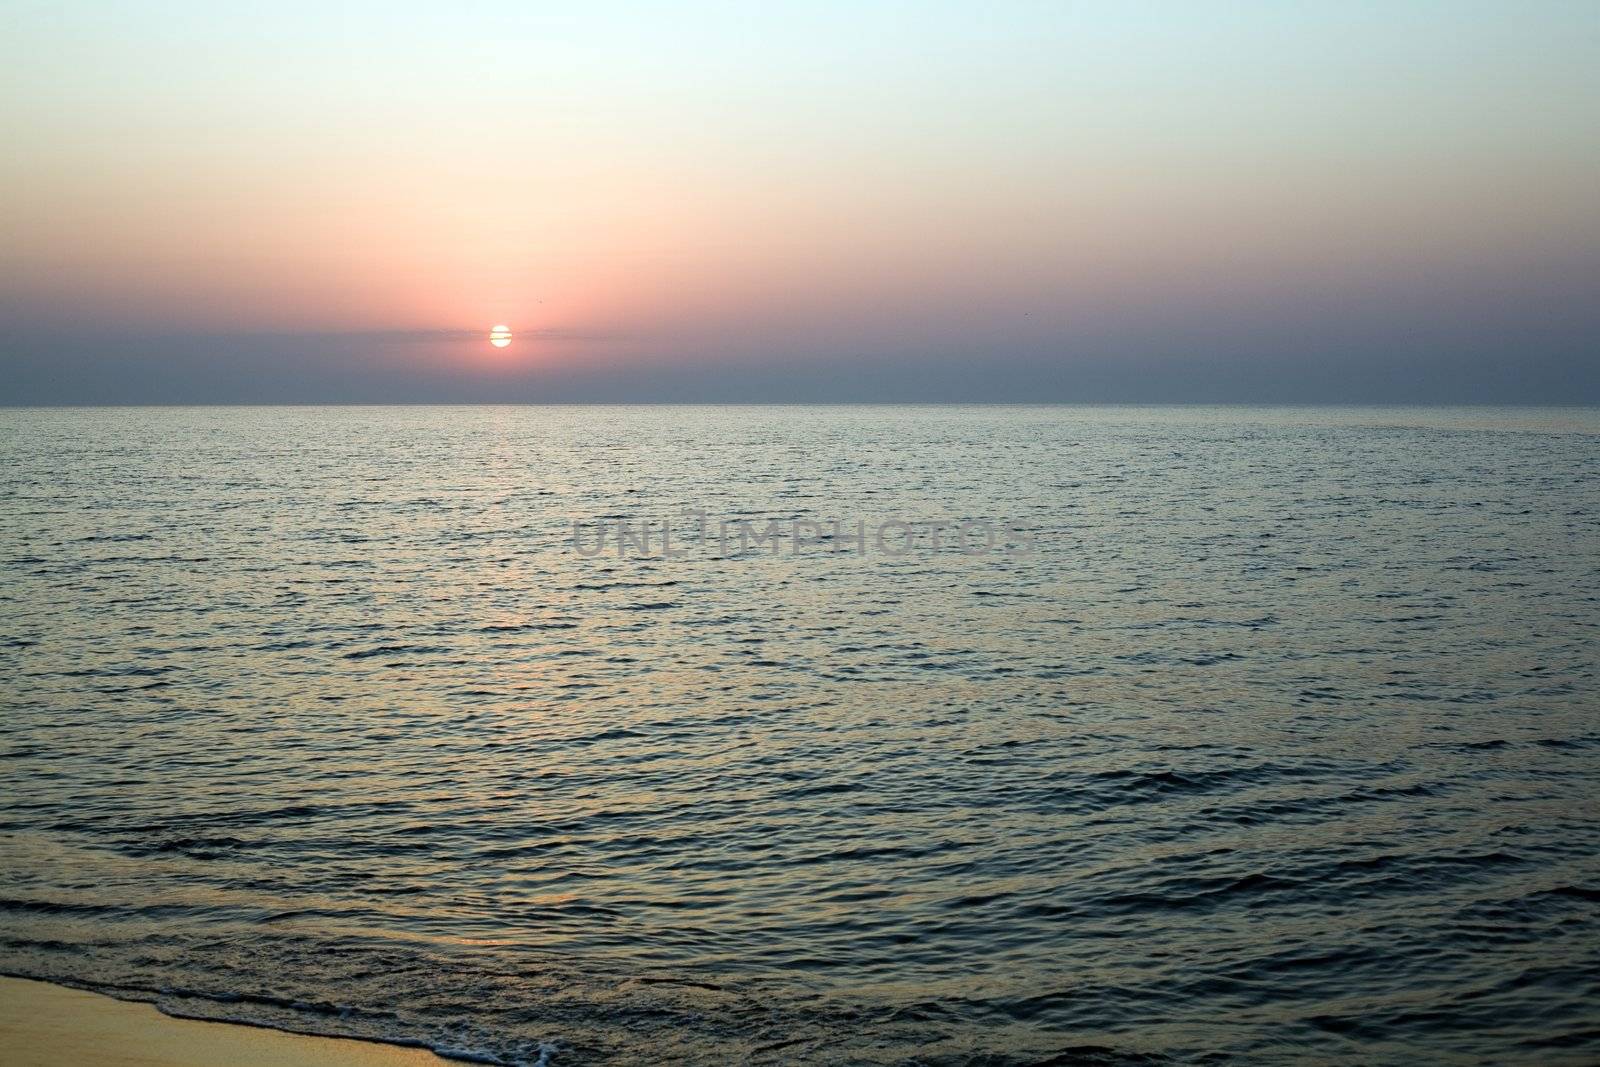 An image of beautiful dawn over the sea